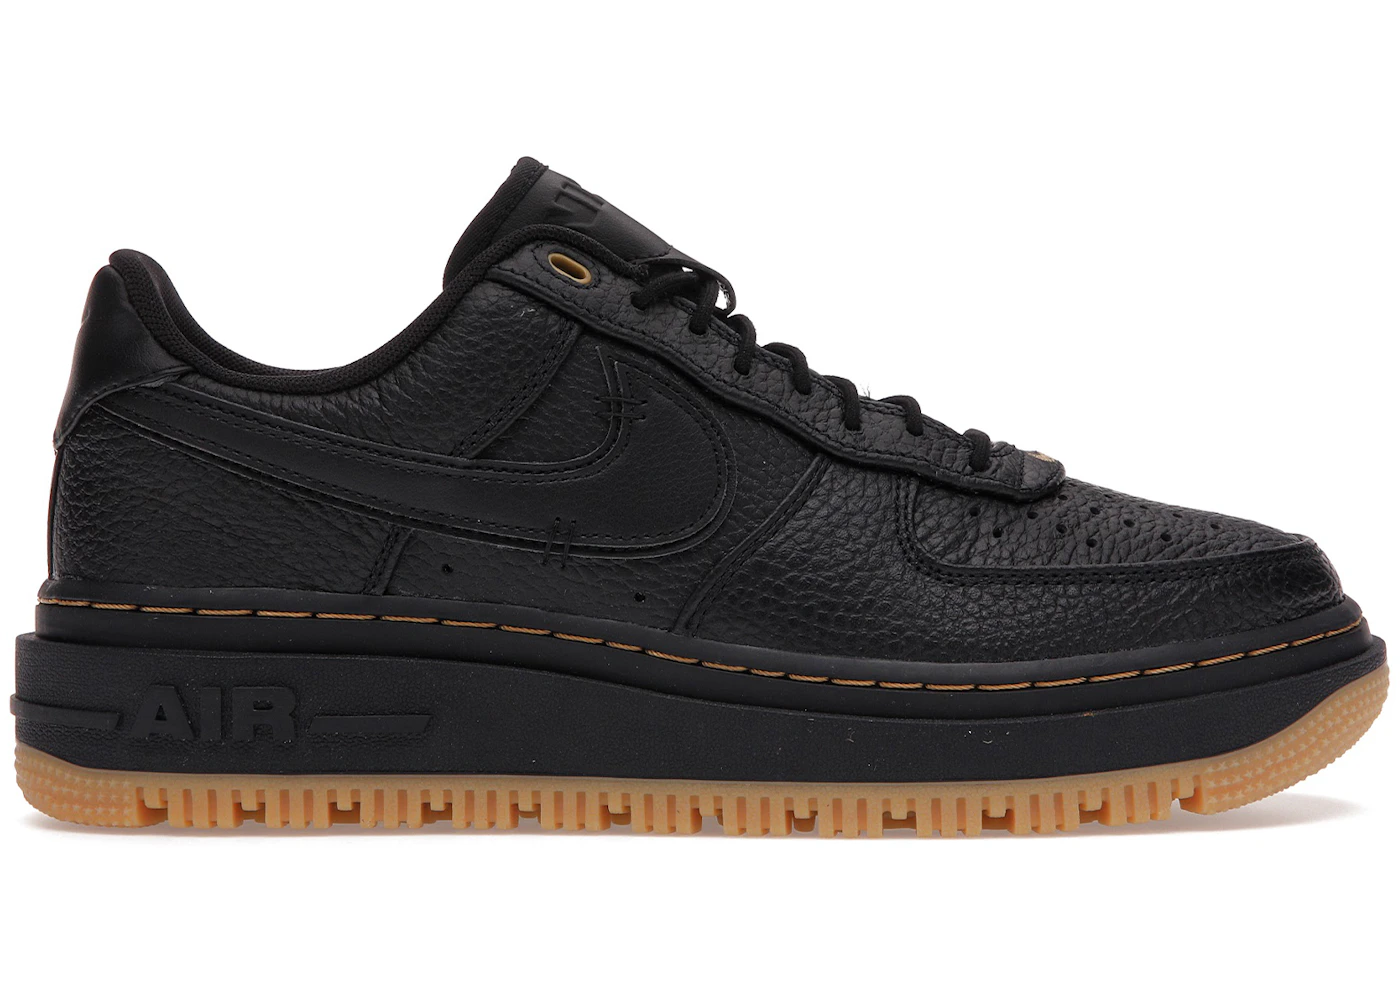 Nike Air Force 1 Low Luxe Black Gum - DB4109-001 - US